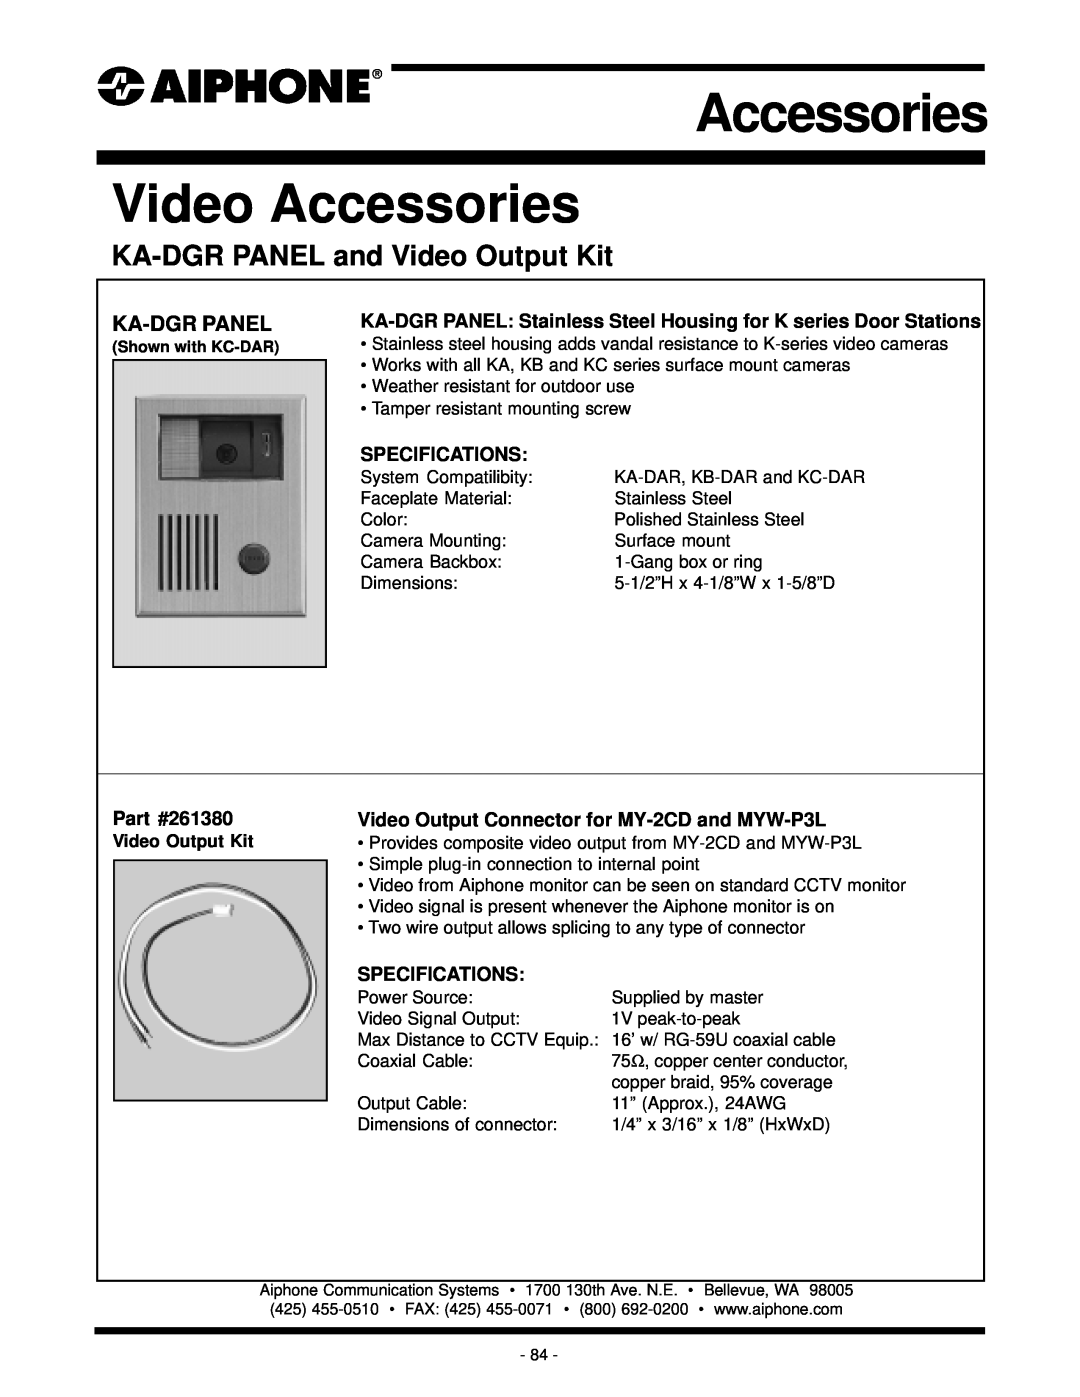 Aiphone MYW-P3L specifications Accessories Video Accessories, KA-DGRPANEL and Video Output Kit, Ka-Dgrpanel, 261380 